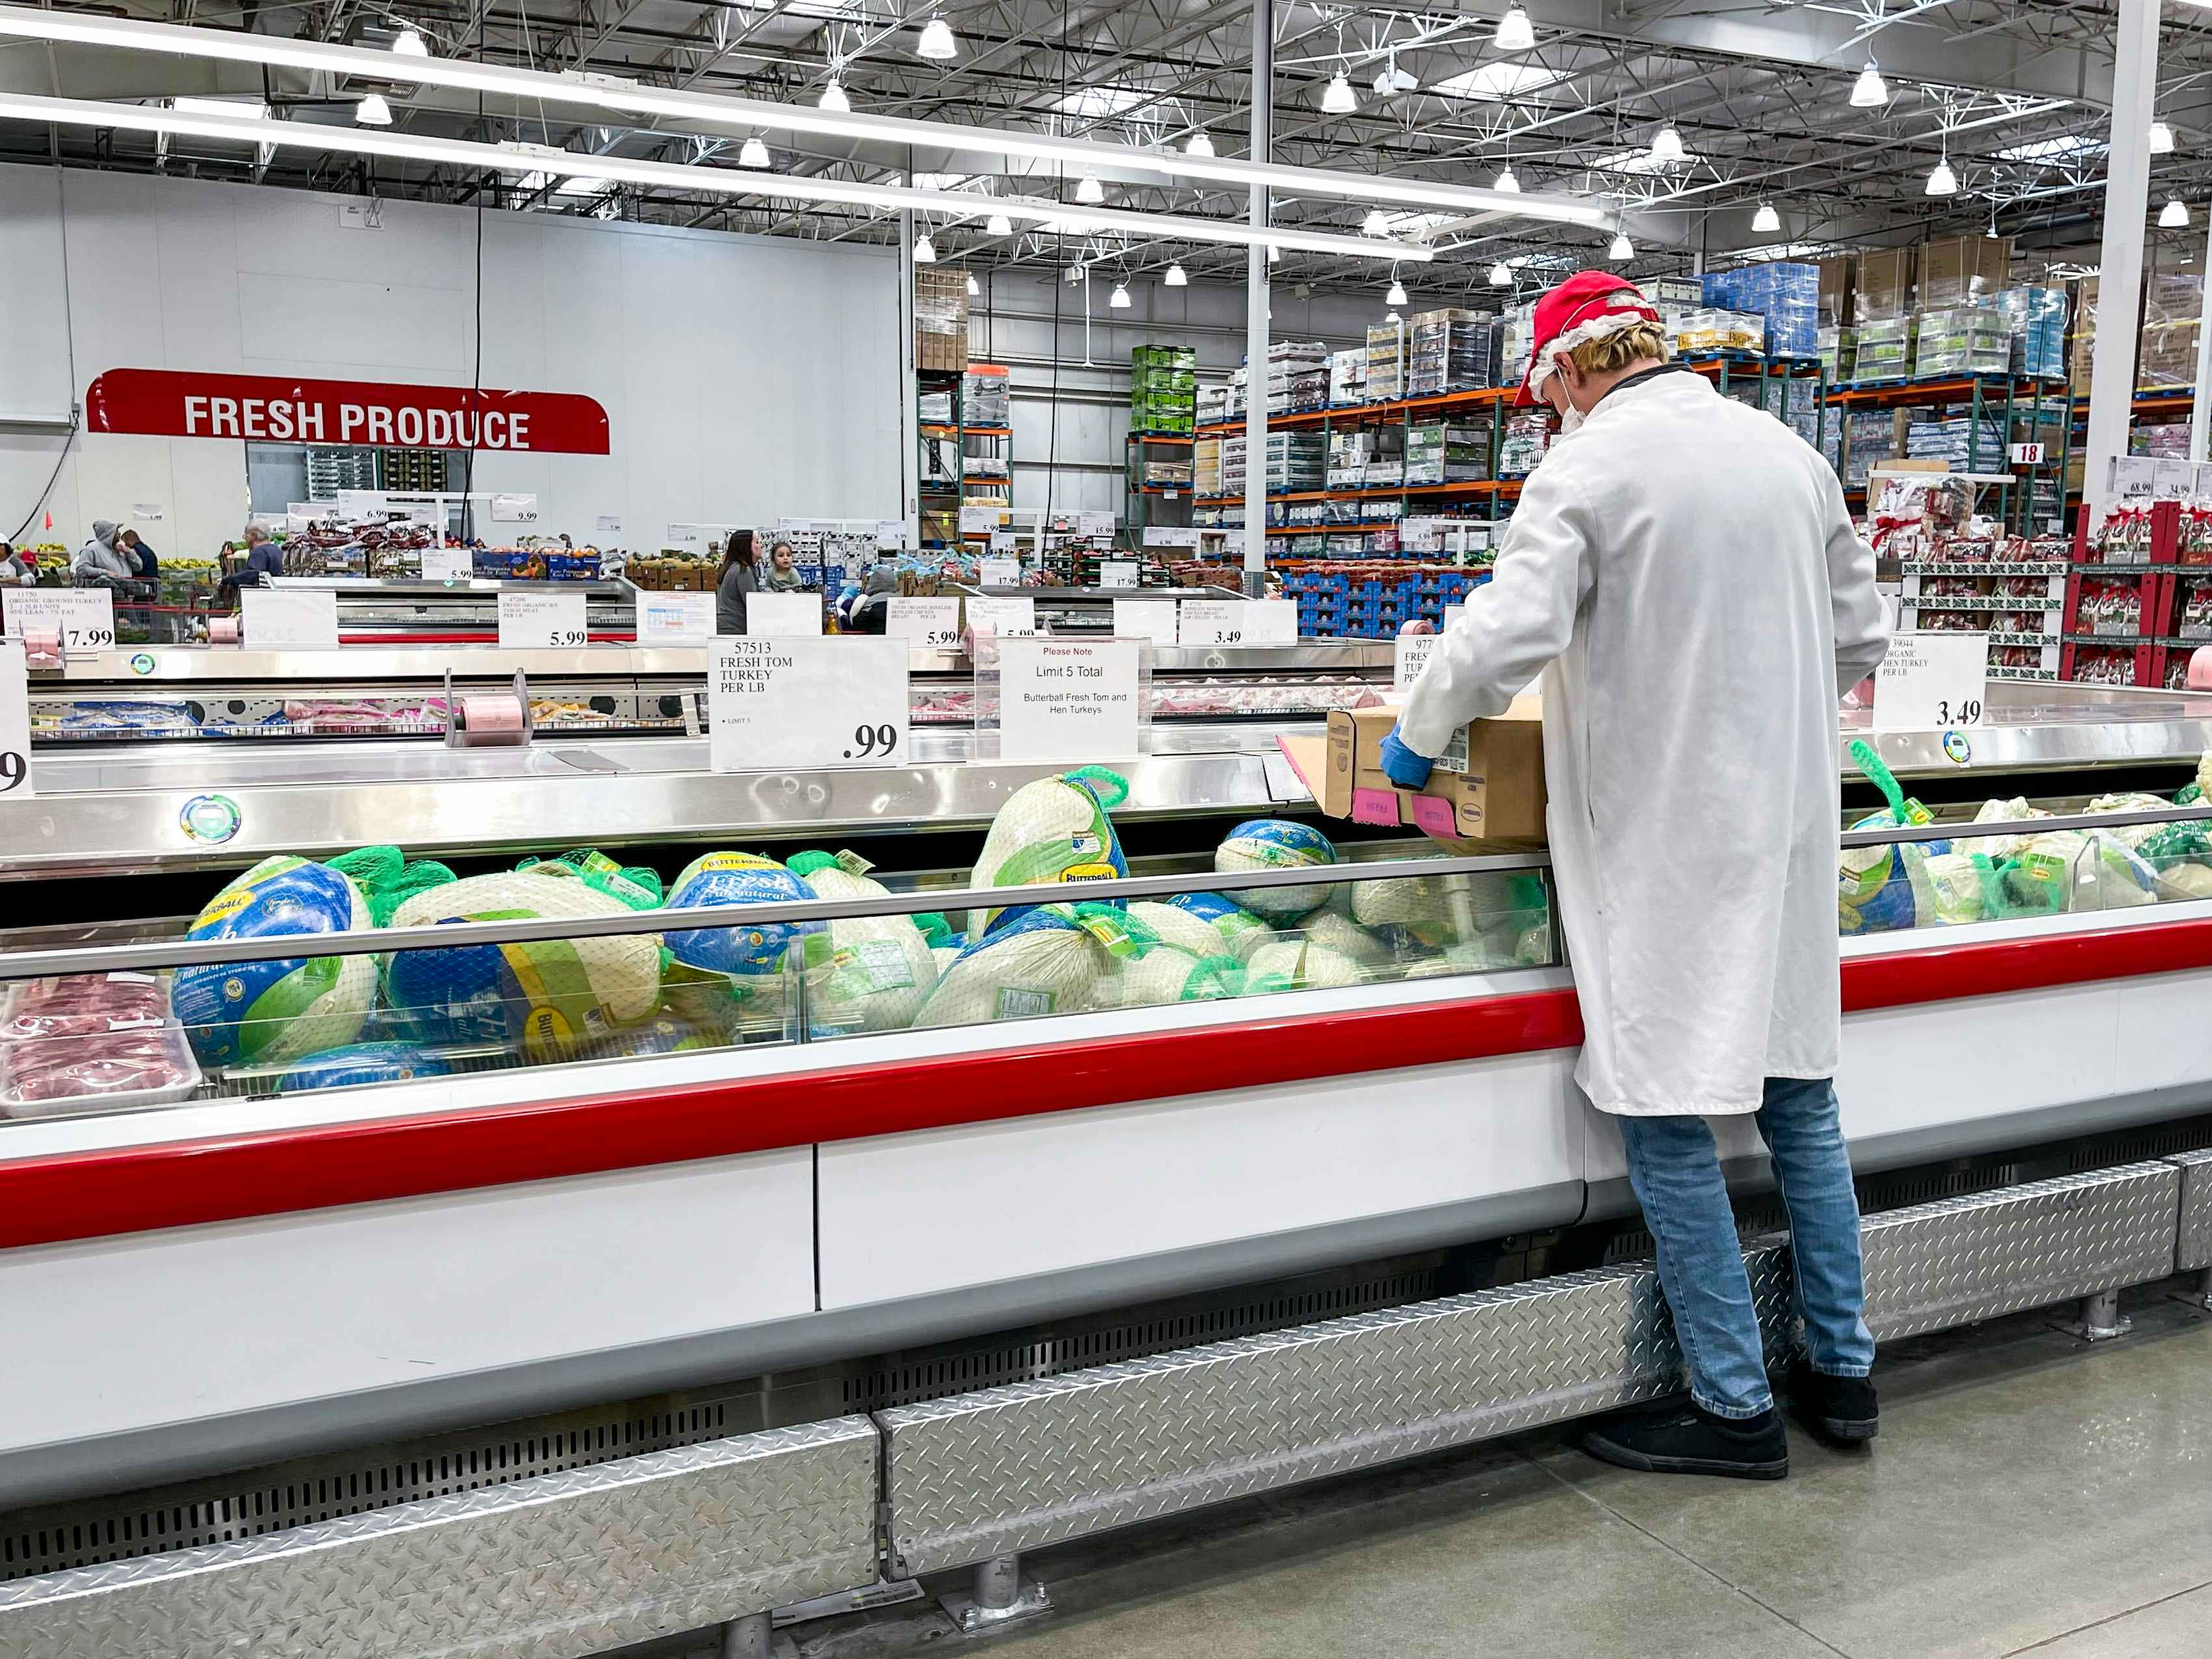 A Costco employee stocking Whole Fresh Butterball turkeys in the refrigerated meat section of Costco